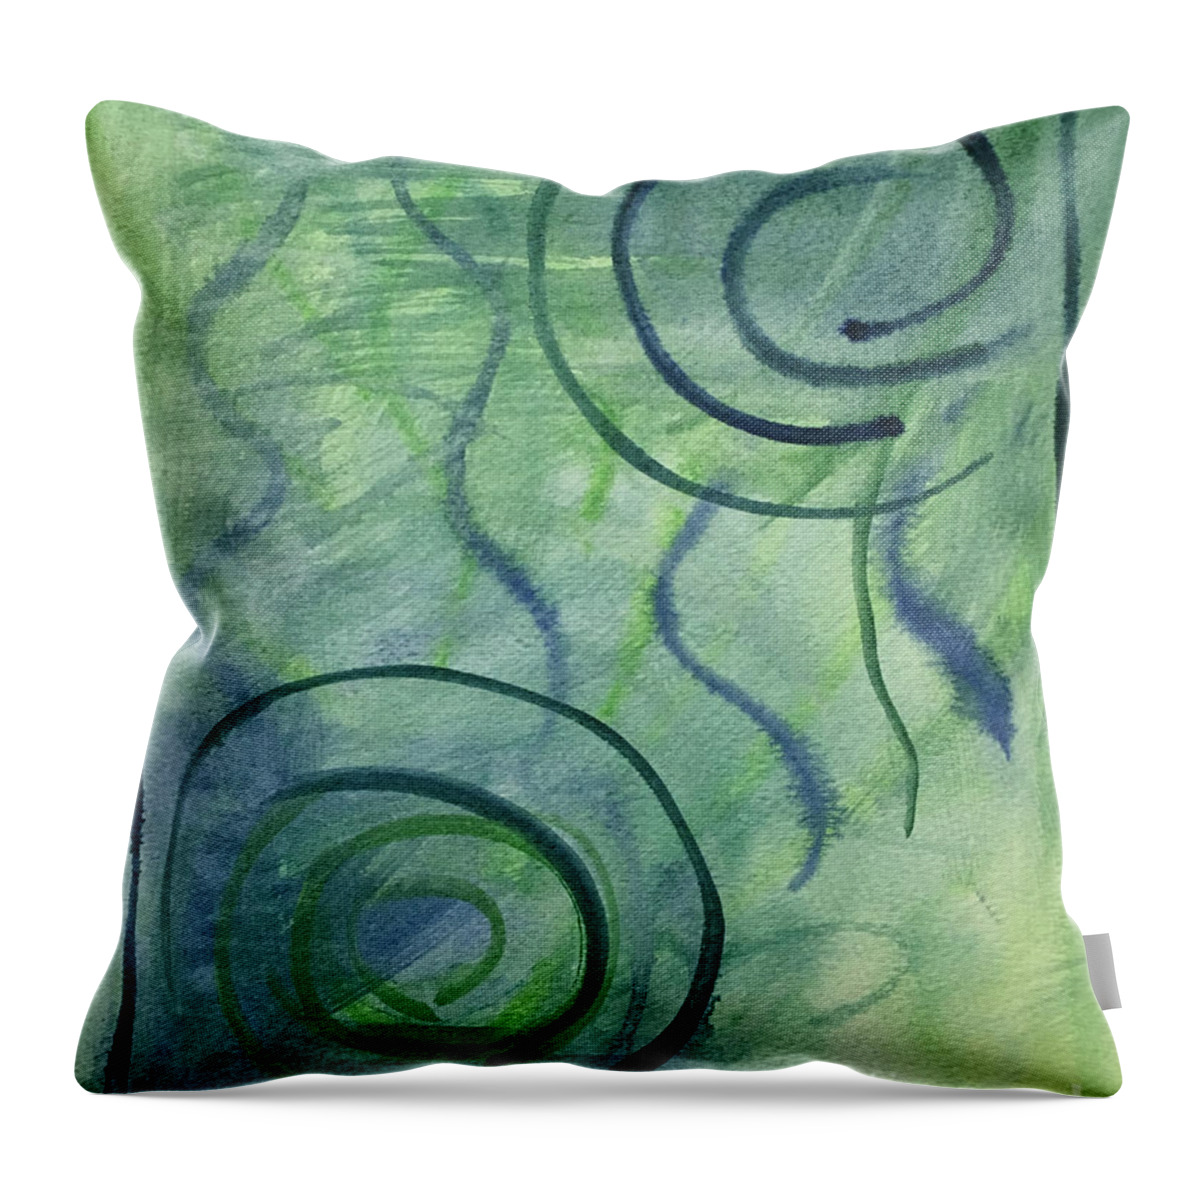 Breeze 2 Beach Collection By Annette M Stevenson Throw Pillow featuring the painting Beach Collection Breeze 2 by Annette M Stevenson